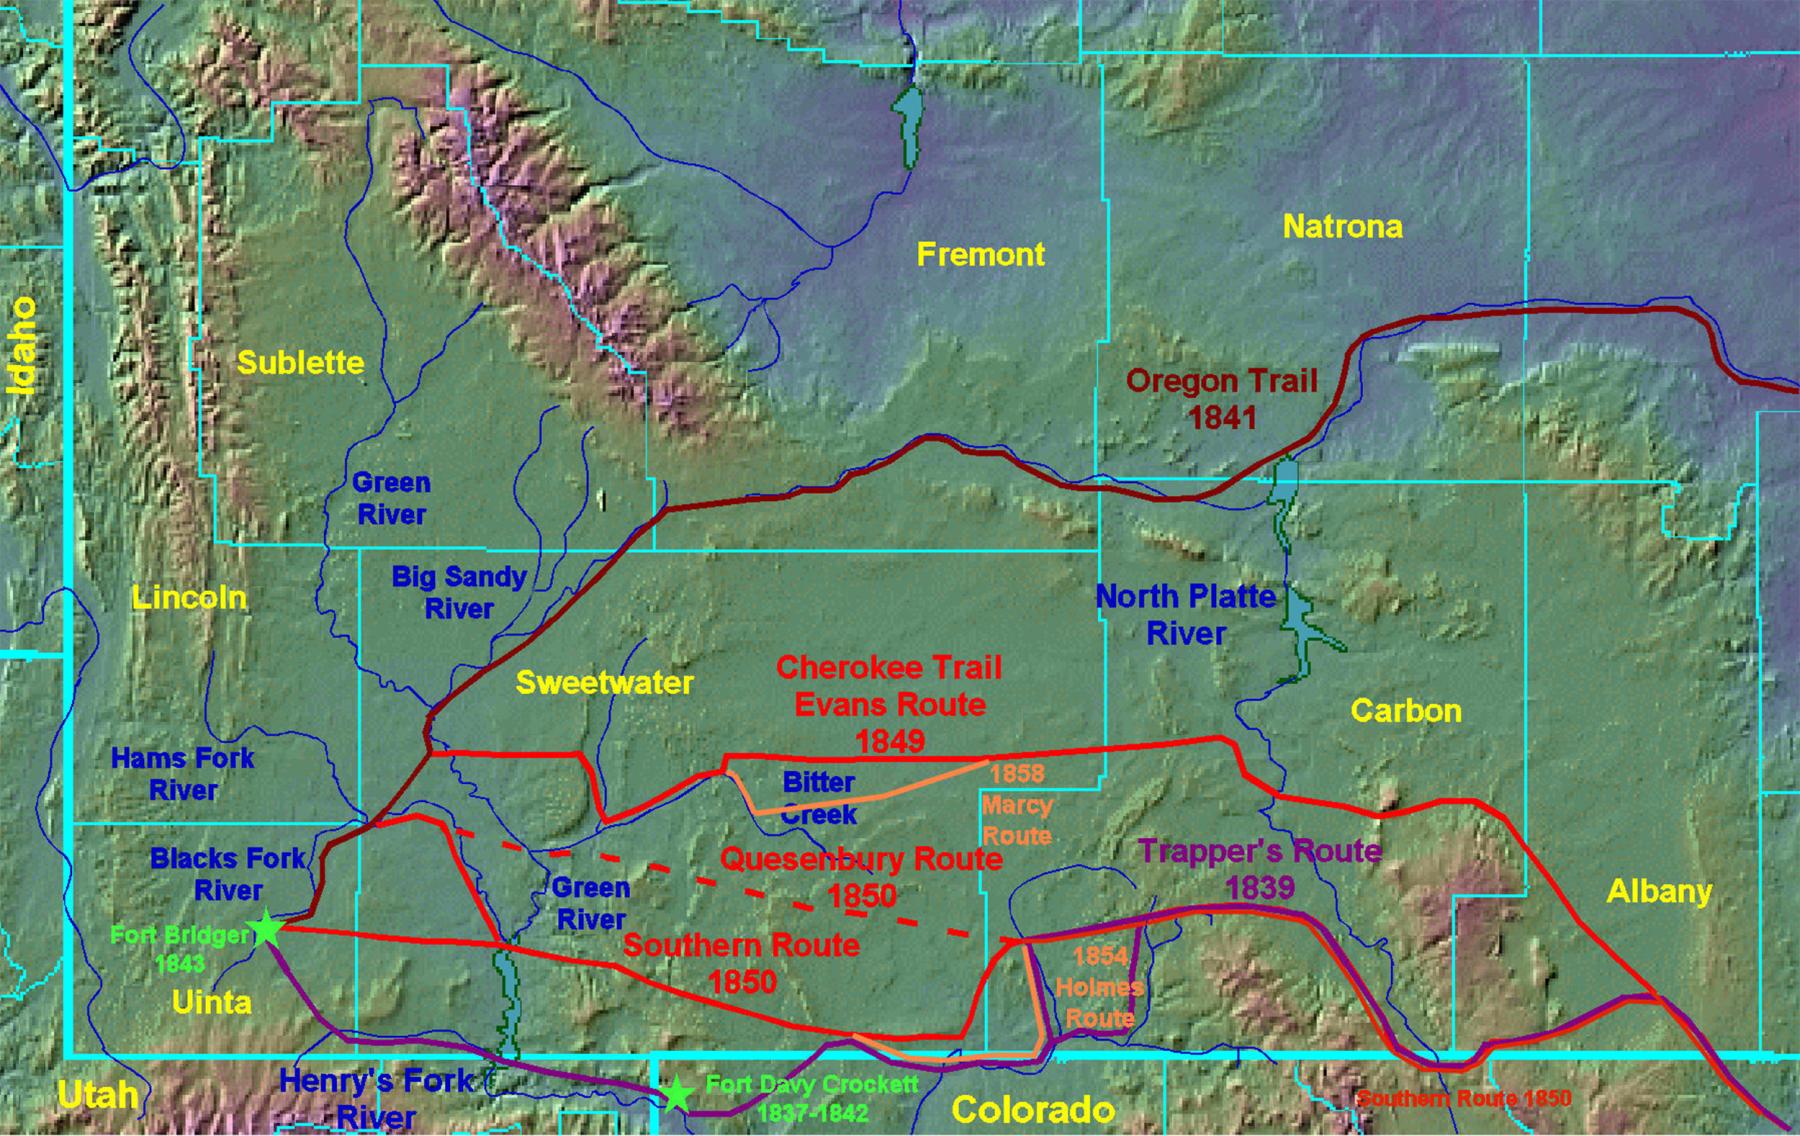 Figure 5: Cherokee Trail variants. The 1850 Quesenbury Route was a one-off pack trail which saw little or no subsequent traffic and has not been relocated. The 1850 Southern Route overlaps or closely parallels the 1830s fur trappers route through present Carbon County. Western Archaeological Services.